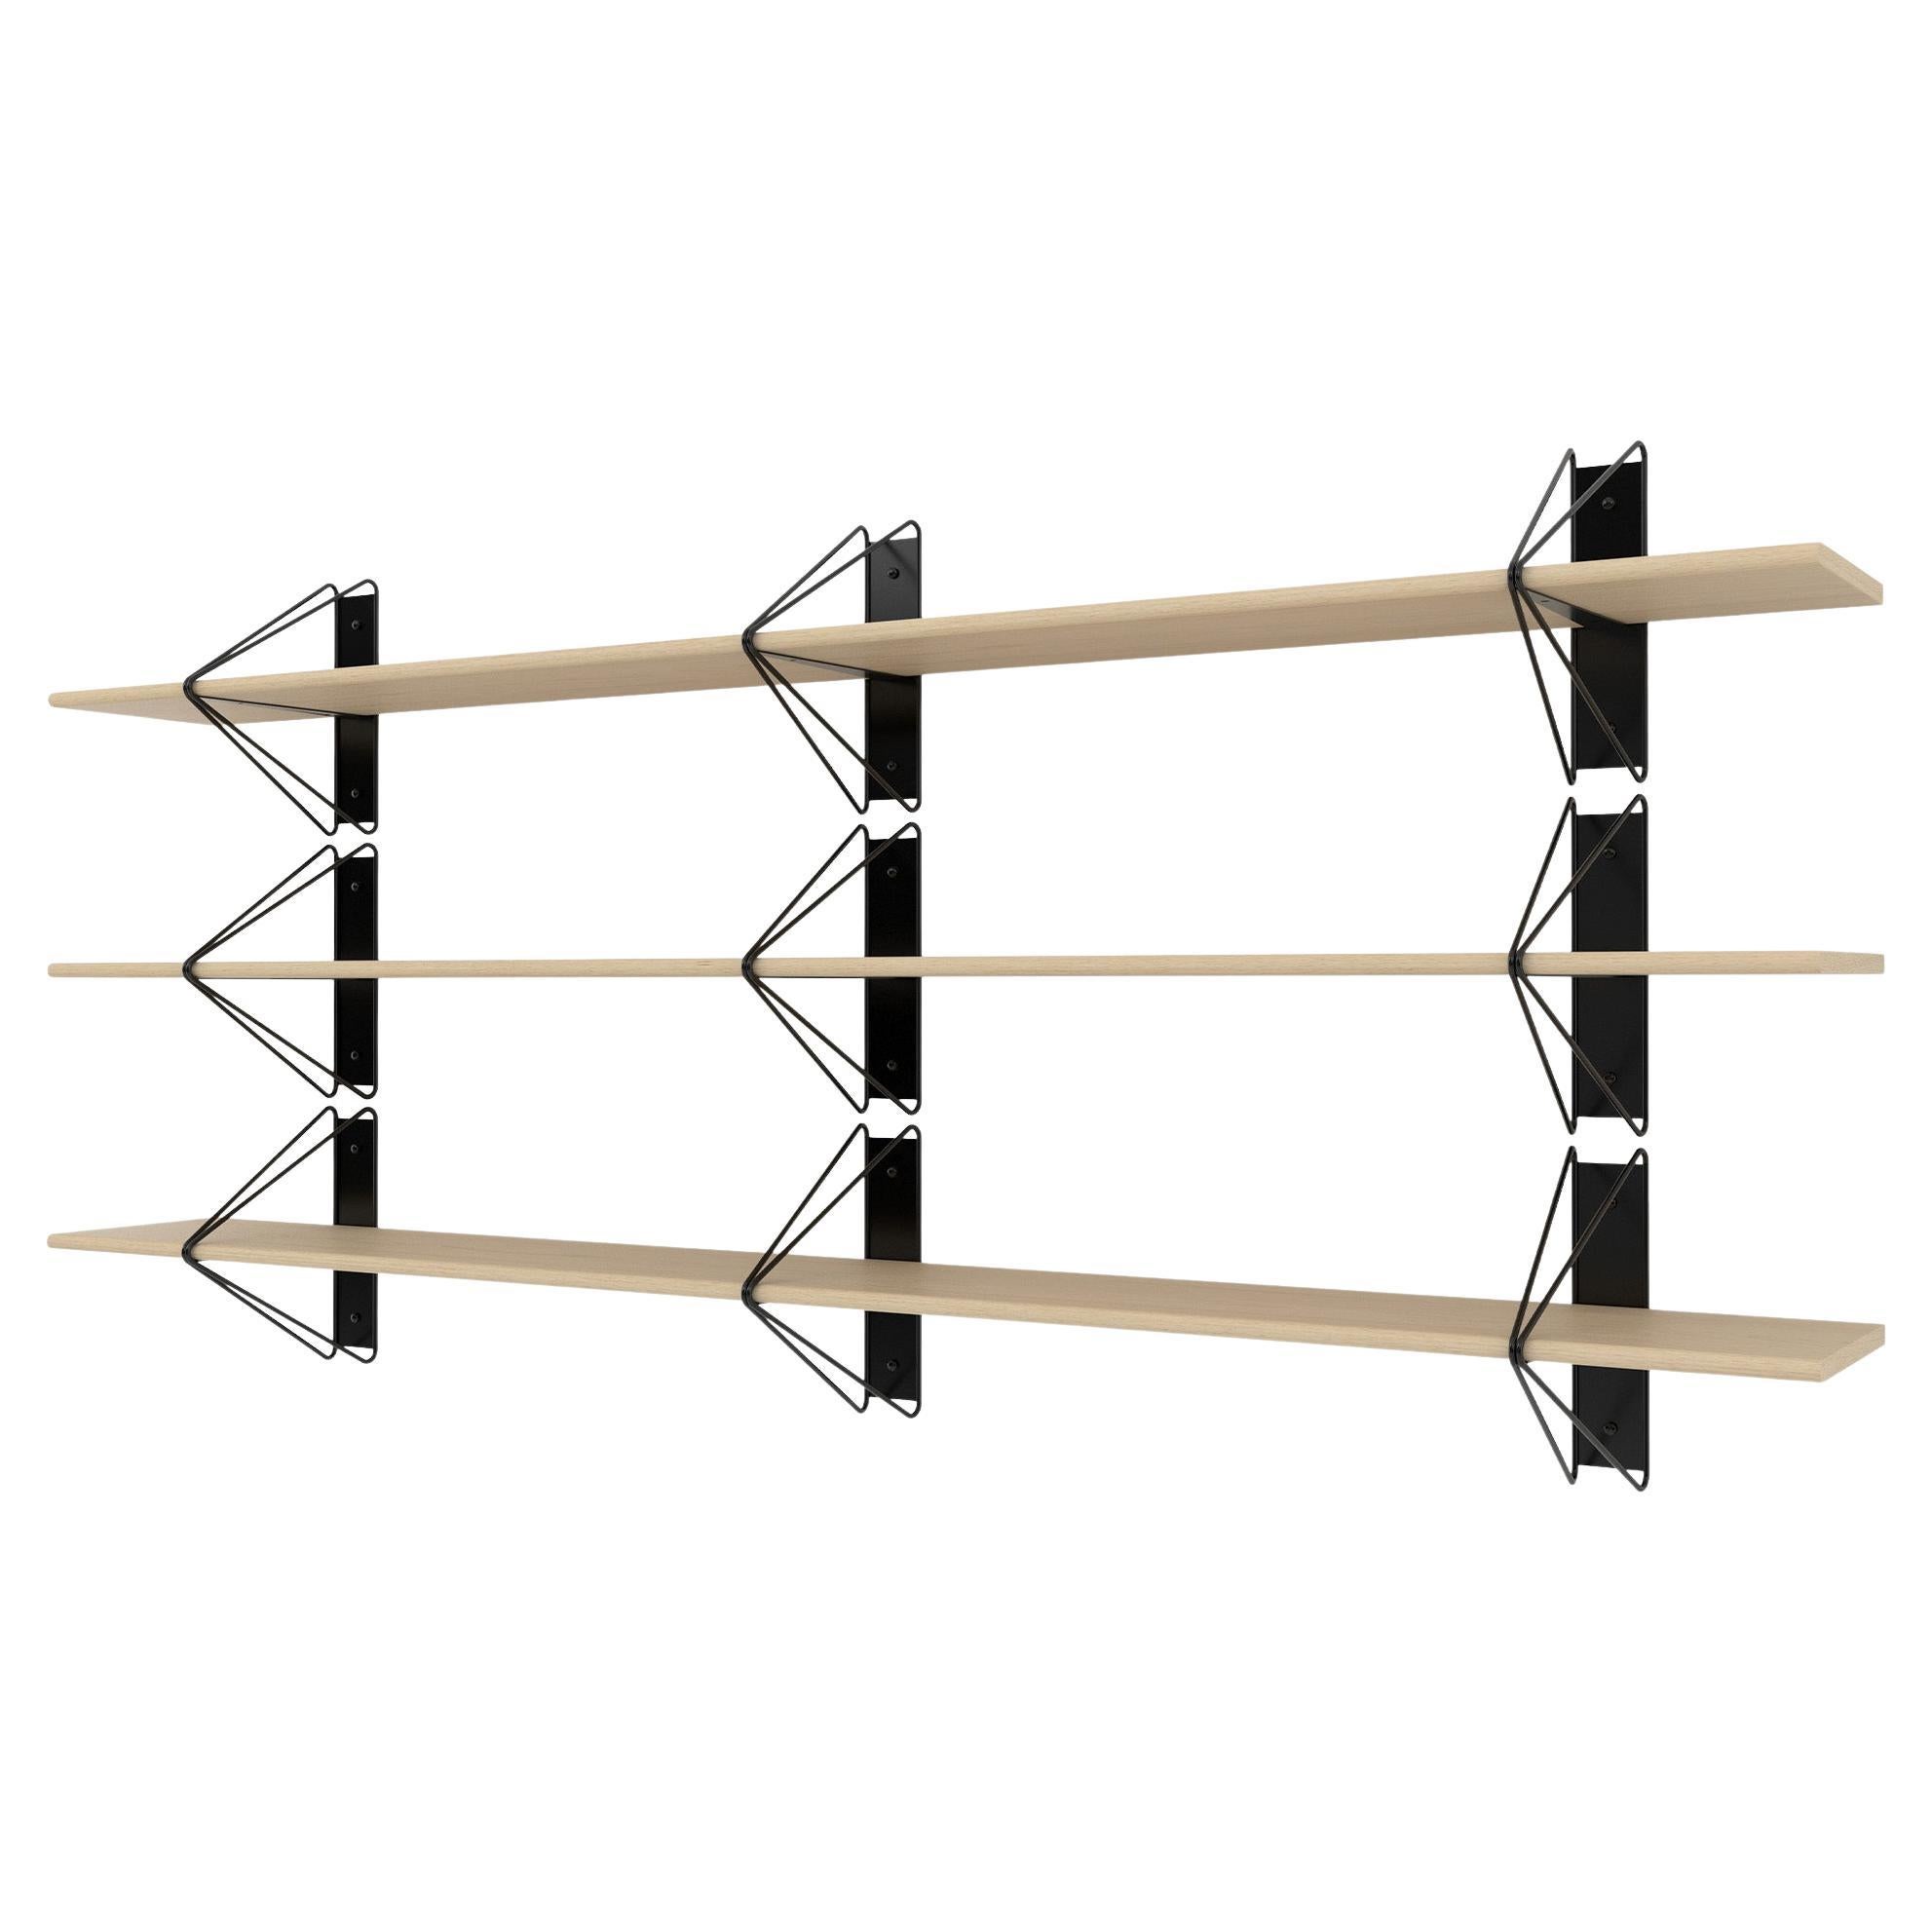 Set of 3 Strut Shelves from Souda, Black and Maple, Made to Order